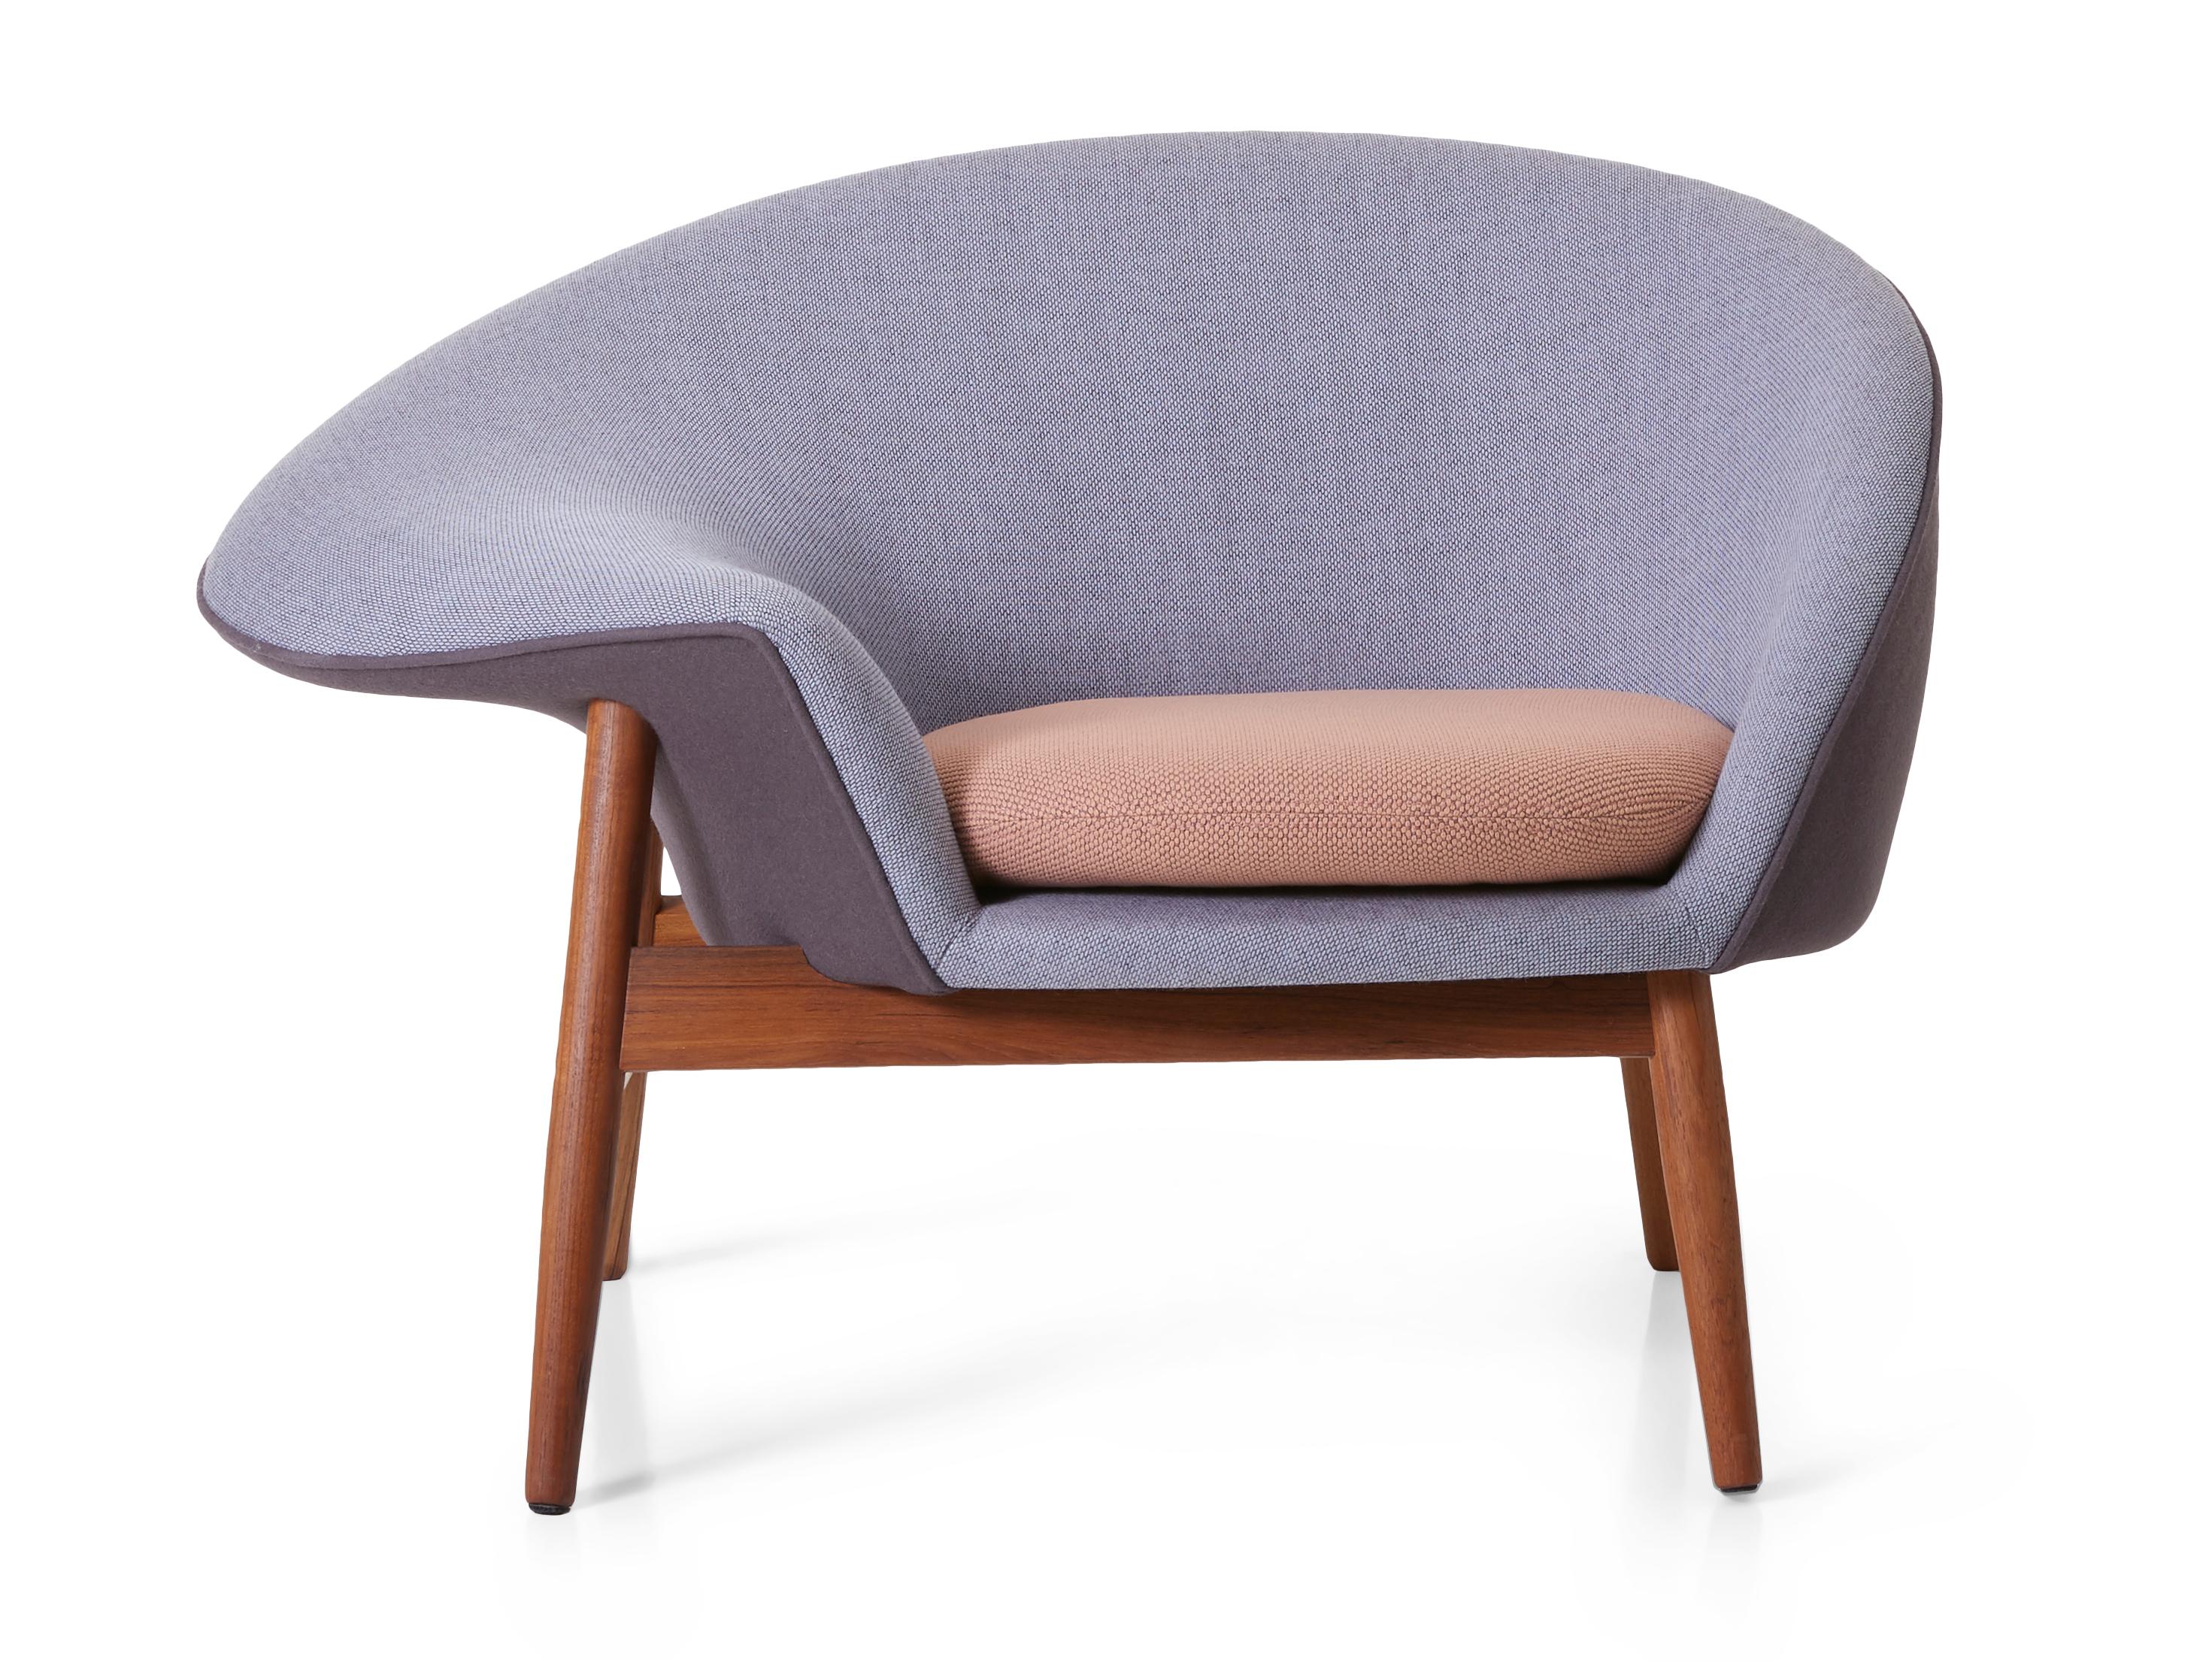 Fried Egg Left Lounge Chair Soft violet Plum Fresh Peach by Warm Nordic
Dimensions: D99 x W68 x H 68 cm
Material: Textile or nubuck upholstery, Solid oiled teak
Weight: 25 kg
Also available in different colours and finishes. Please contact